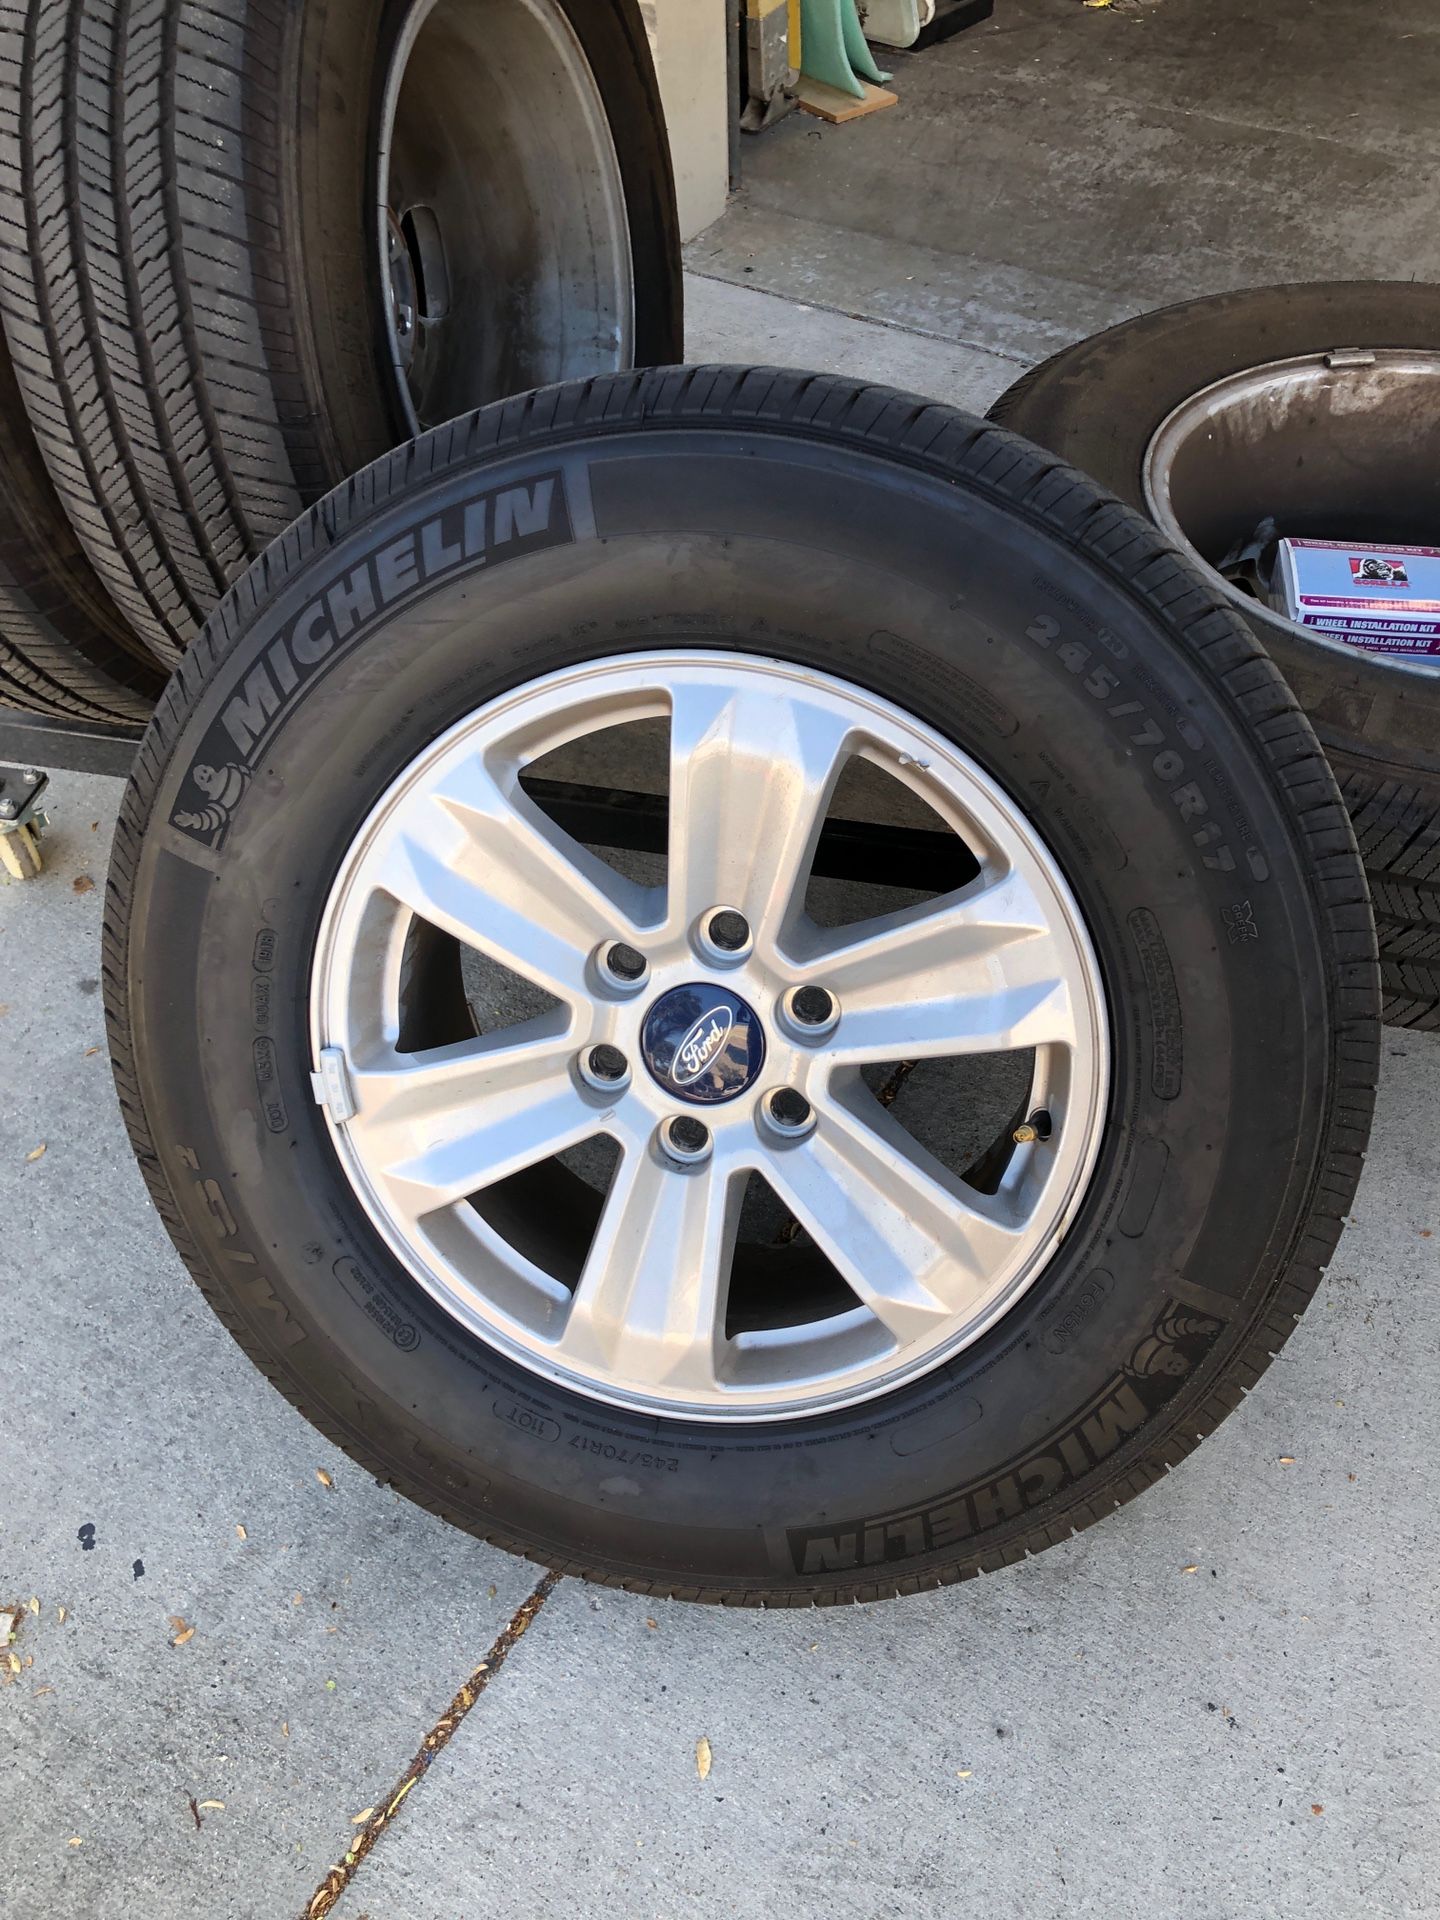 2019 F-150 17” rims and tires